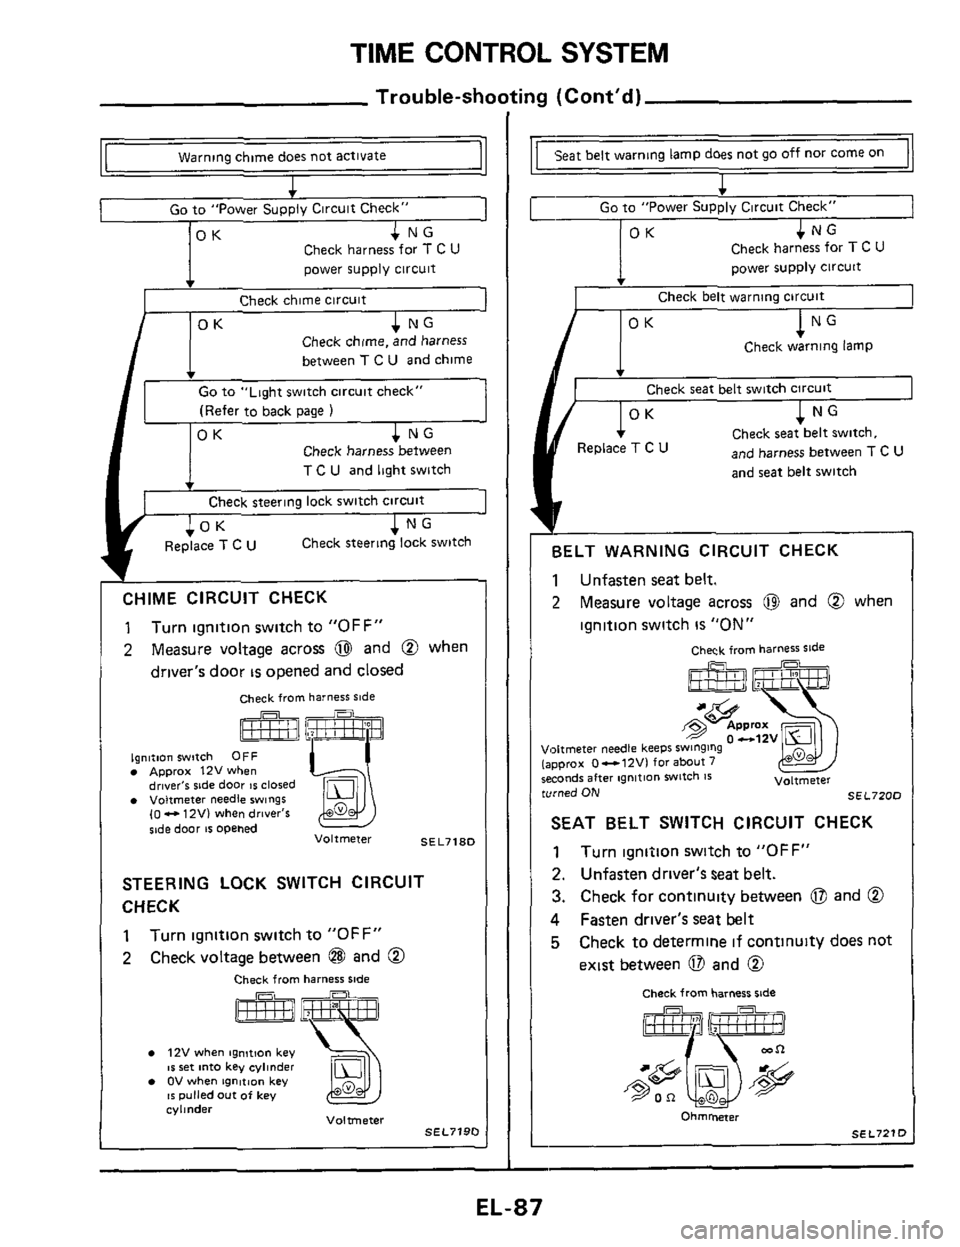 NISSAN 300ZX 1984 Z31 Electrical System User Guide TIME CONTROL SYSTEM 
Trouble-shooting (Contd) 
CHIME CIRCUIT  CHECK 
1 
2 
Turn ignition  switch to "OFF" 
Measure  voltage across @ and @ when 
drivers  door 
is opened and closed 
Check  from harn